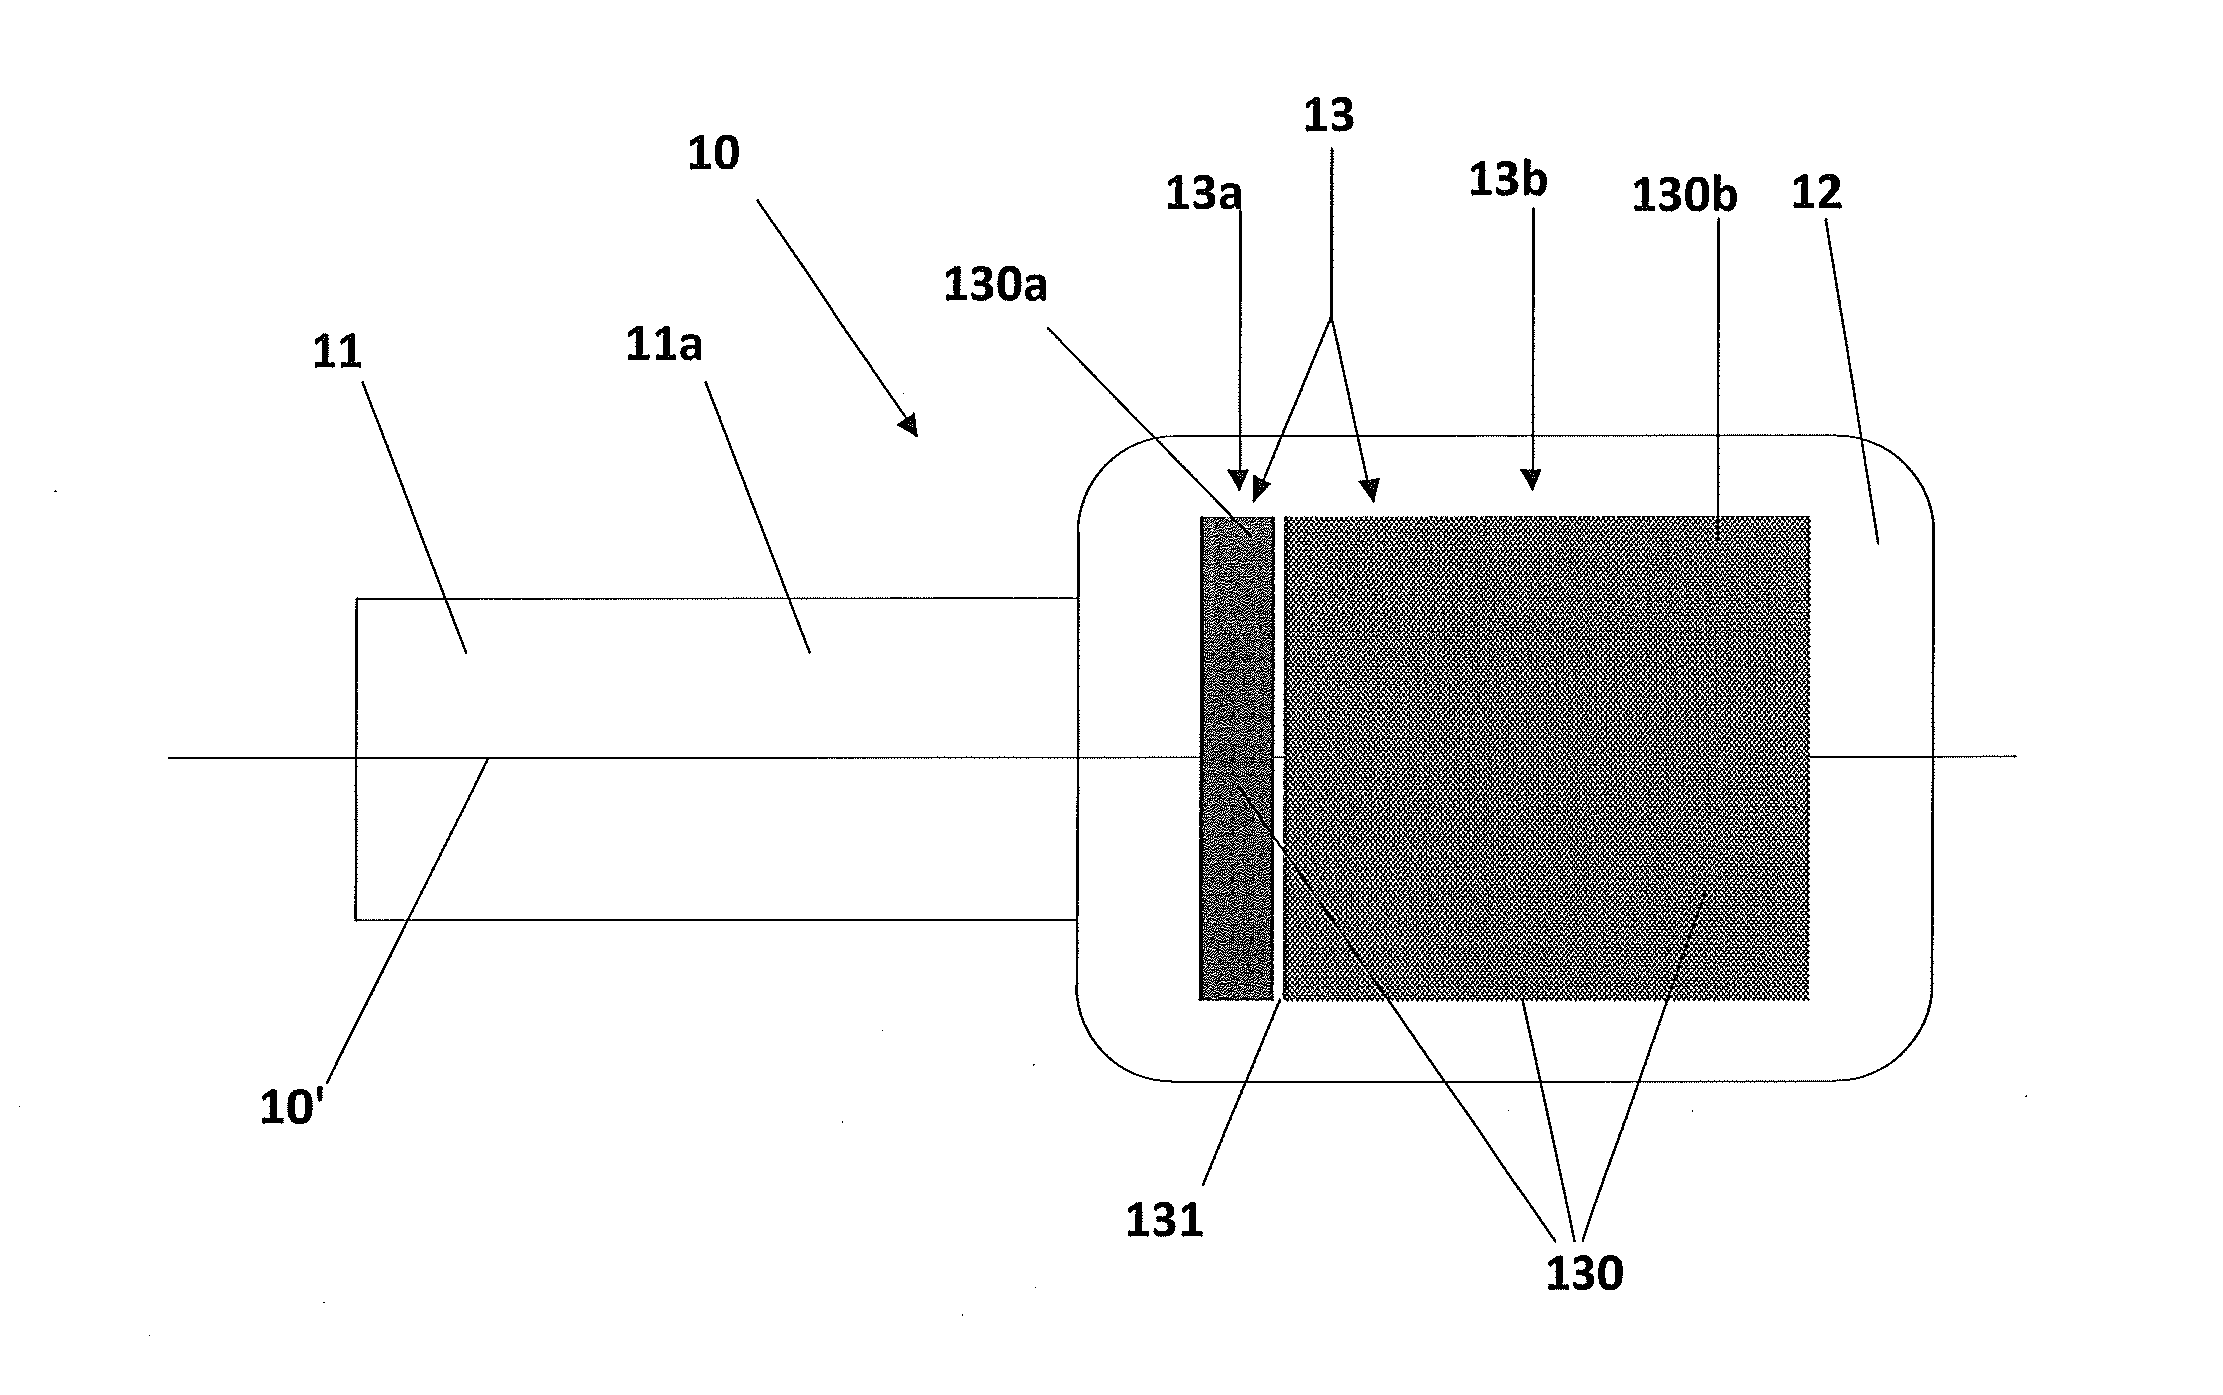 Method of manufacturing an ultrasound transducer and devices including an ultrasound transducer